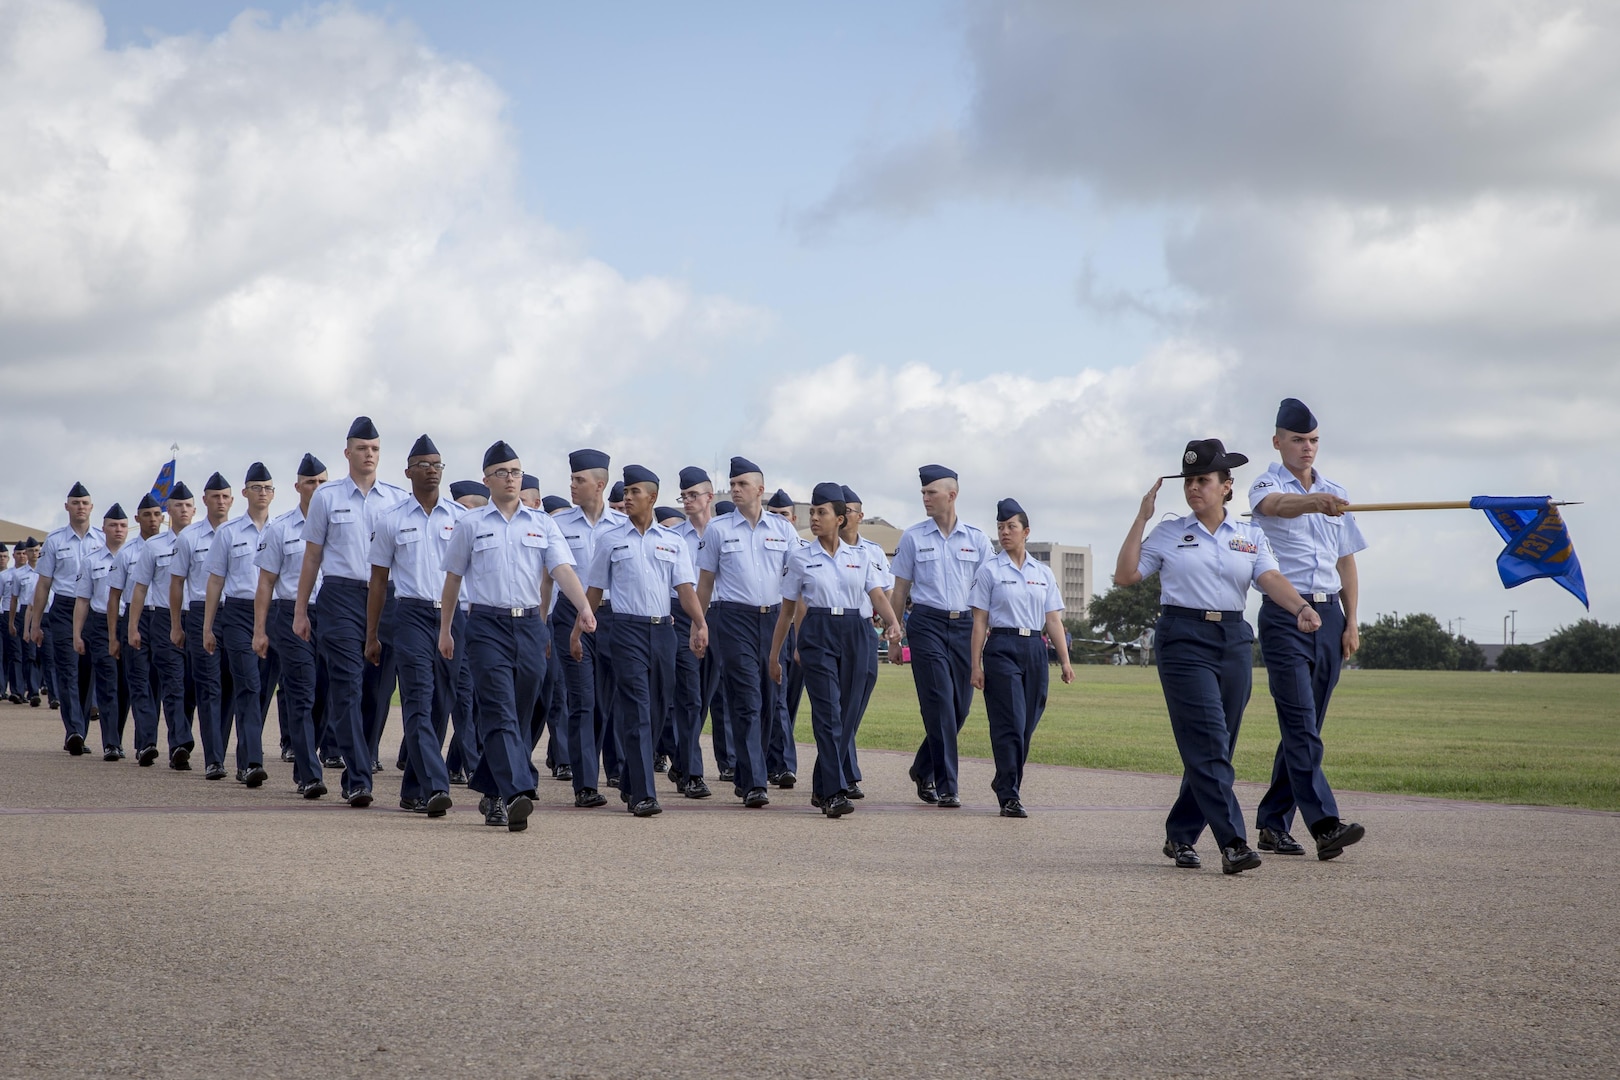 For the first time in Air Force Basic Military Training, Airmen march in integrated Heritage Flights during the Air Force Basic Training Graduation Parade July 17 at Joint Base San Antonio-Lackland. The Heritage flights, named after enlisted members in Air Force history, are part of a new initiative to completely gender integrate all facets of Air Force Basic Training and instill honor, as well as a deep understanding of the core values and appreciation for Airmen who paved the way for today’s Air Force. (U.S. Air Force photo by Joshua Rodriguez) (released)